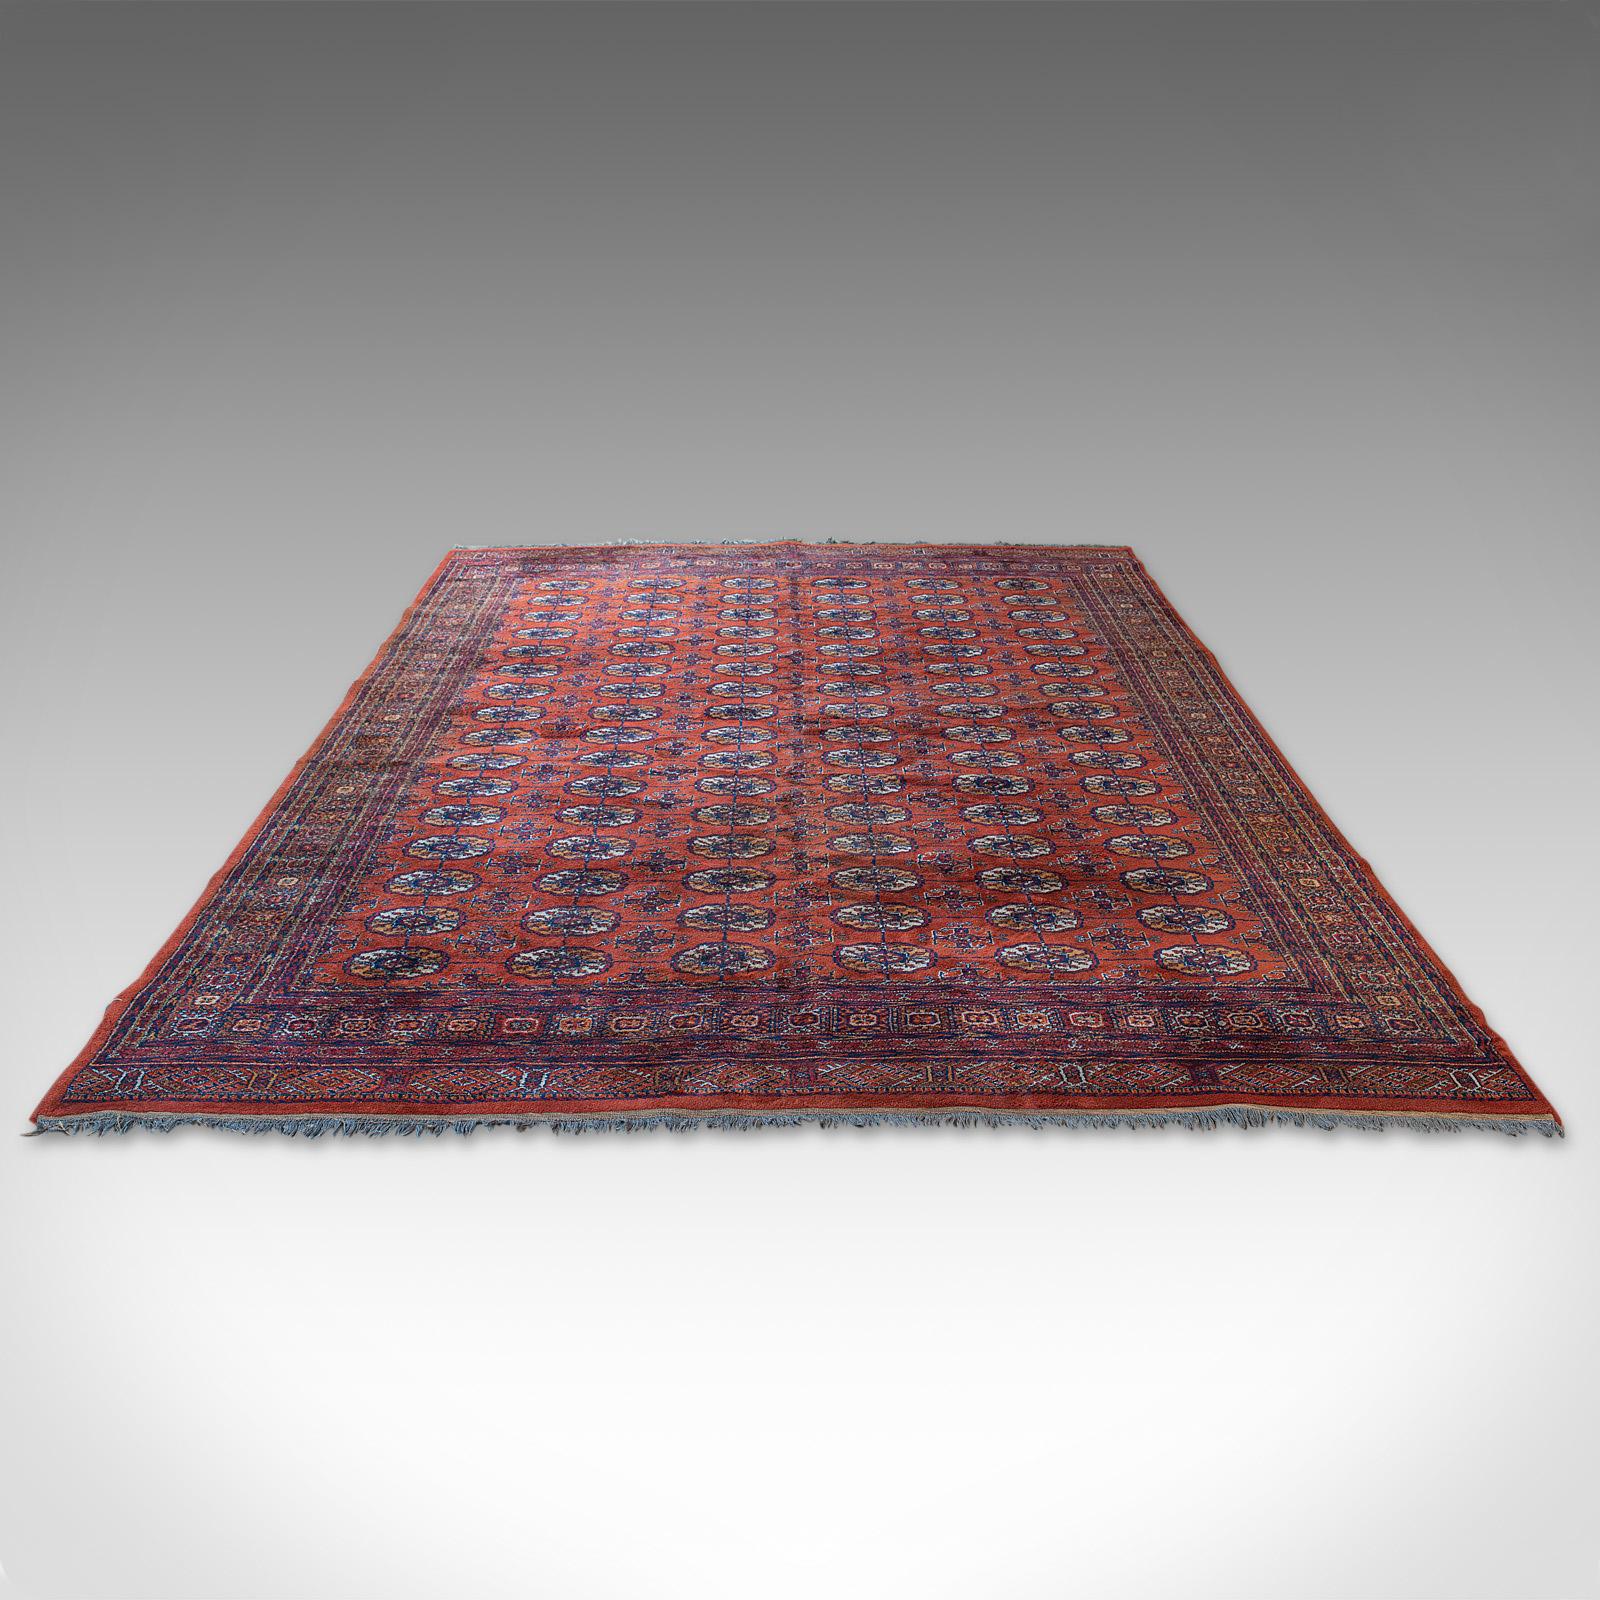 This is a large vintage Bokhara carpet. A Middle Eastern, woolen hall or living room rug, dating to the late 20th century, circa 1970.

Generously sized Qali at 341cm (134.25